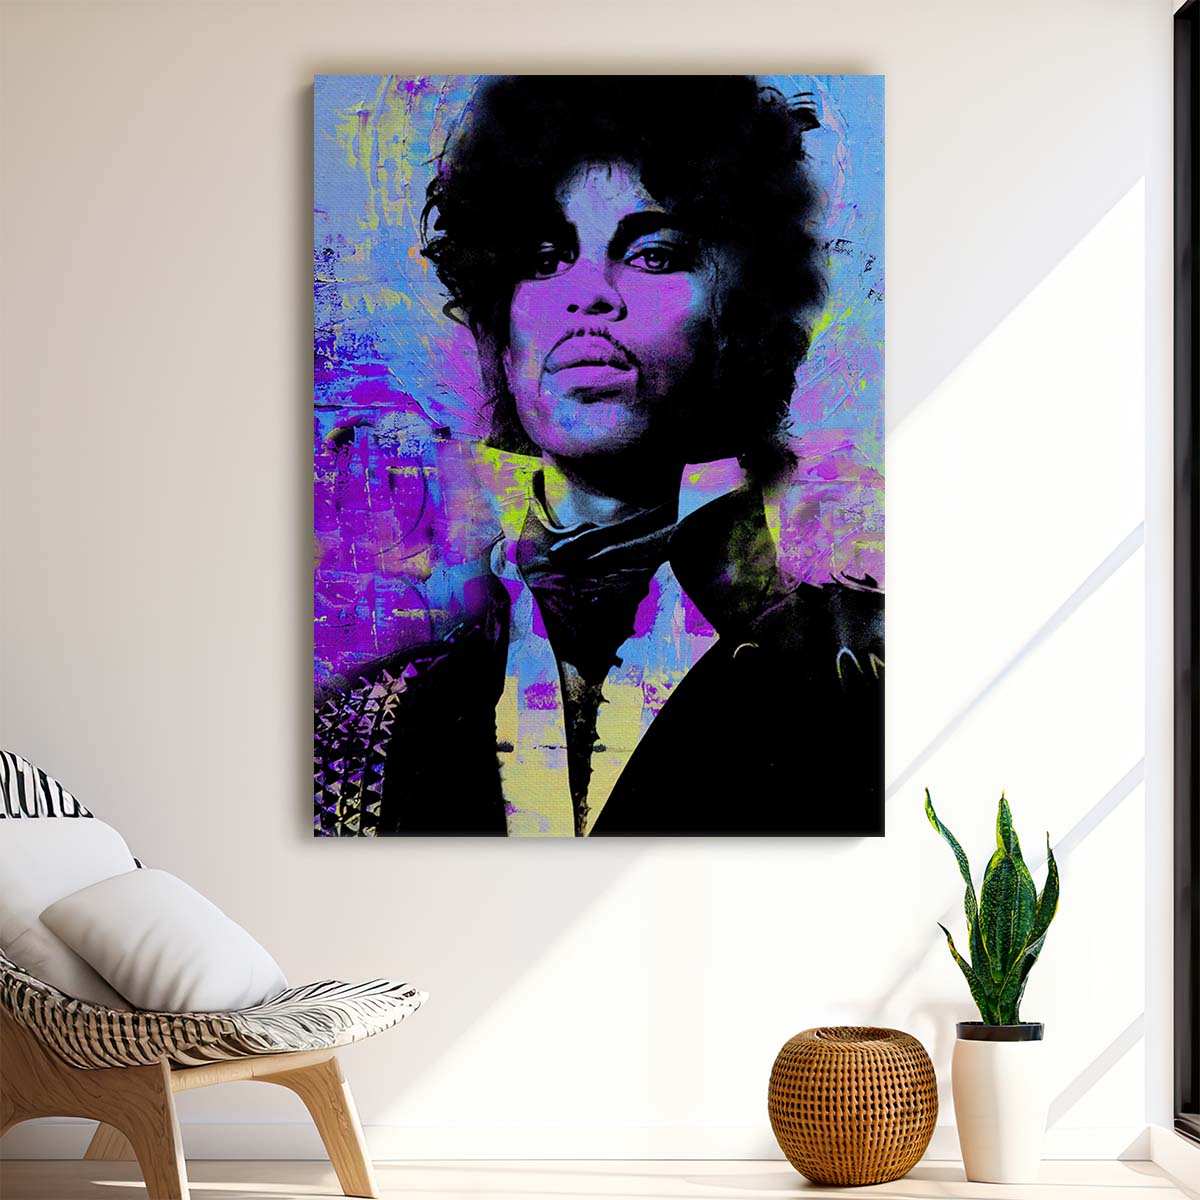 Prince Portrait Circles Graffiti Wall Art by Luxuriance Designs. Made in USA.